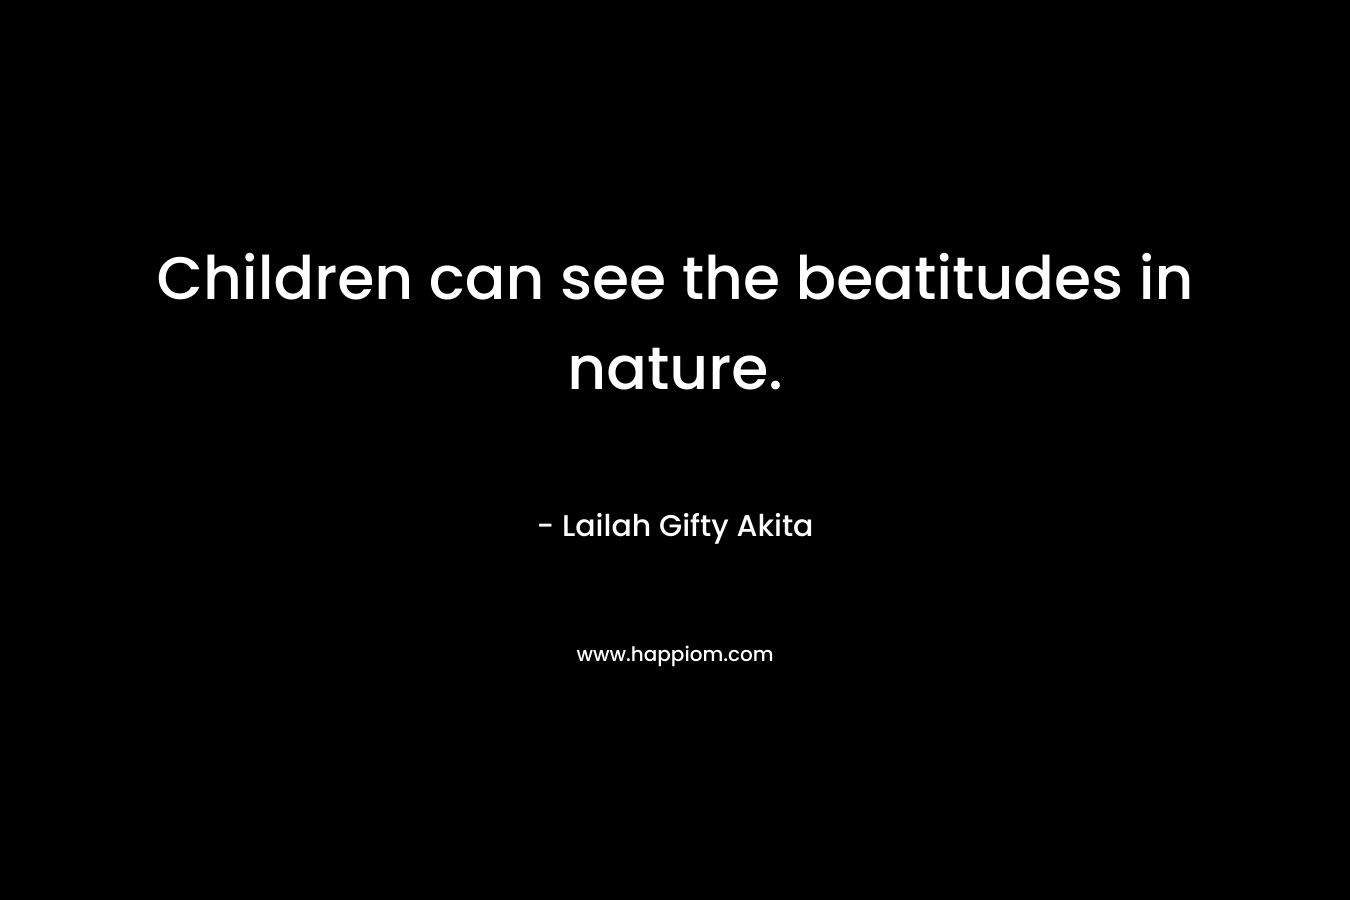 Children can see the beatitudes in nature.